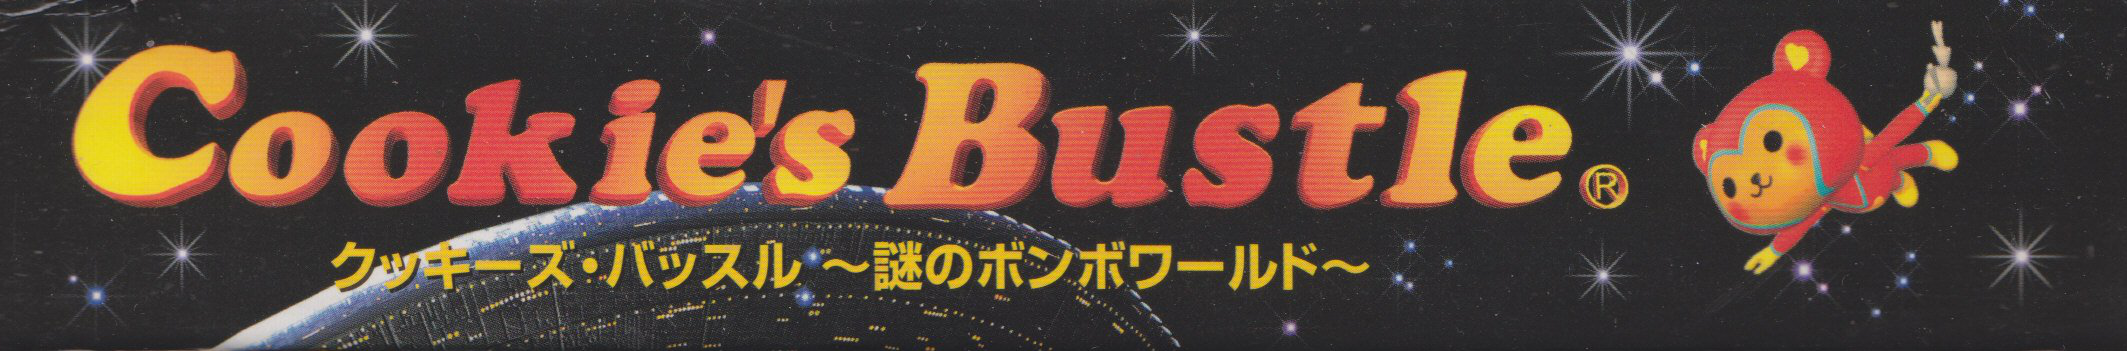 The top of the Cookie's Bustle box.  3D text reading 'Cookie's Bustle' takes up most of the image, with a japanese subtitle underneath.  Cookie- a little girl that looks like a yellow teddie bear- is flying around on the right, wearing a jumpsuit and holding a grey stuffed rabbit.  The background is a starry sky with part of a UFO.